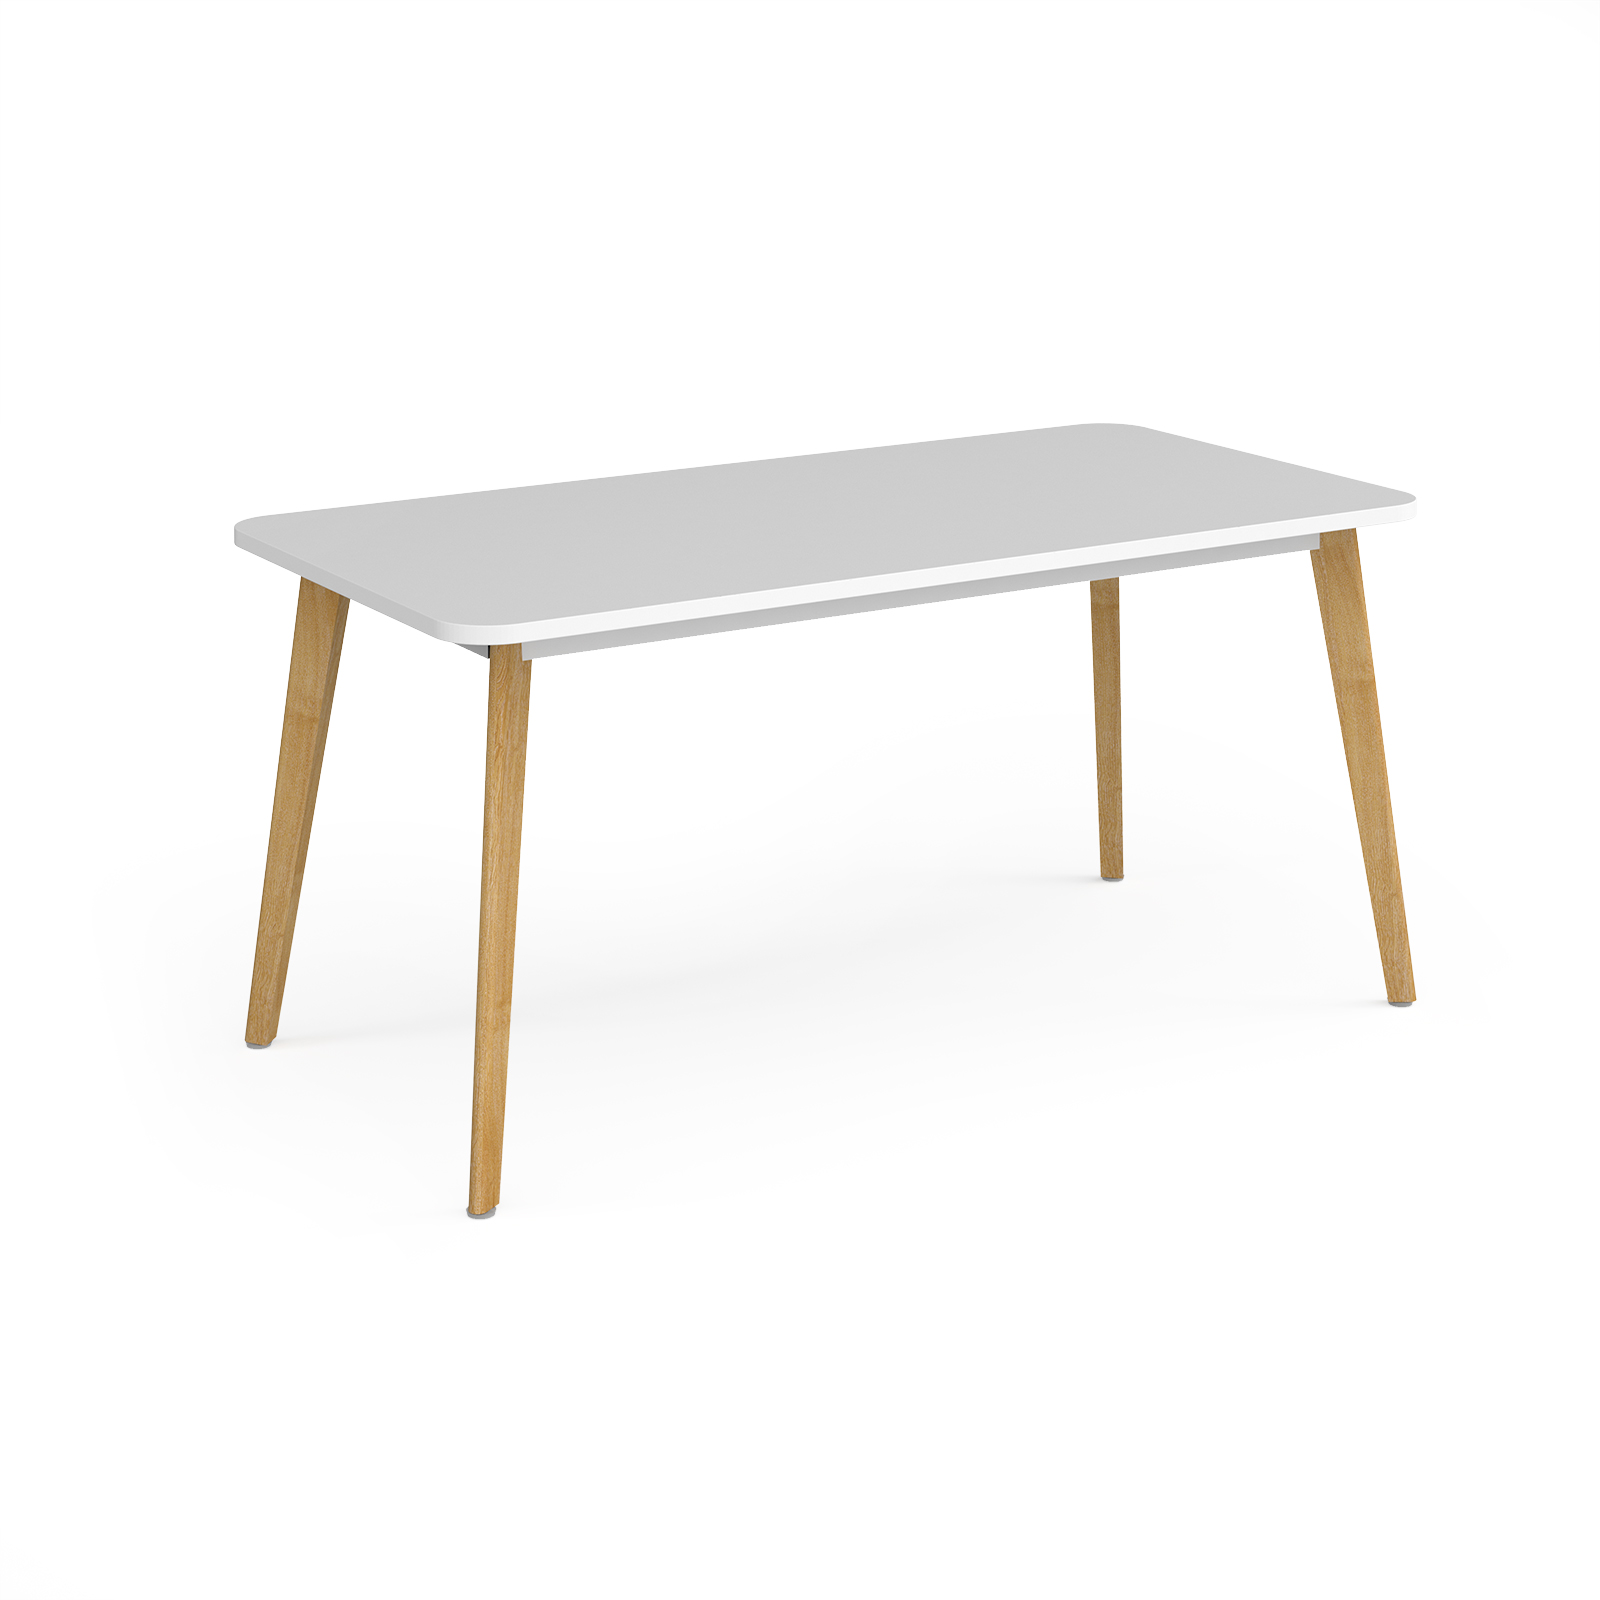 Como rectangular dining table with 4 oak legs 1800mm x 800mm - white